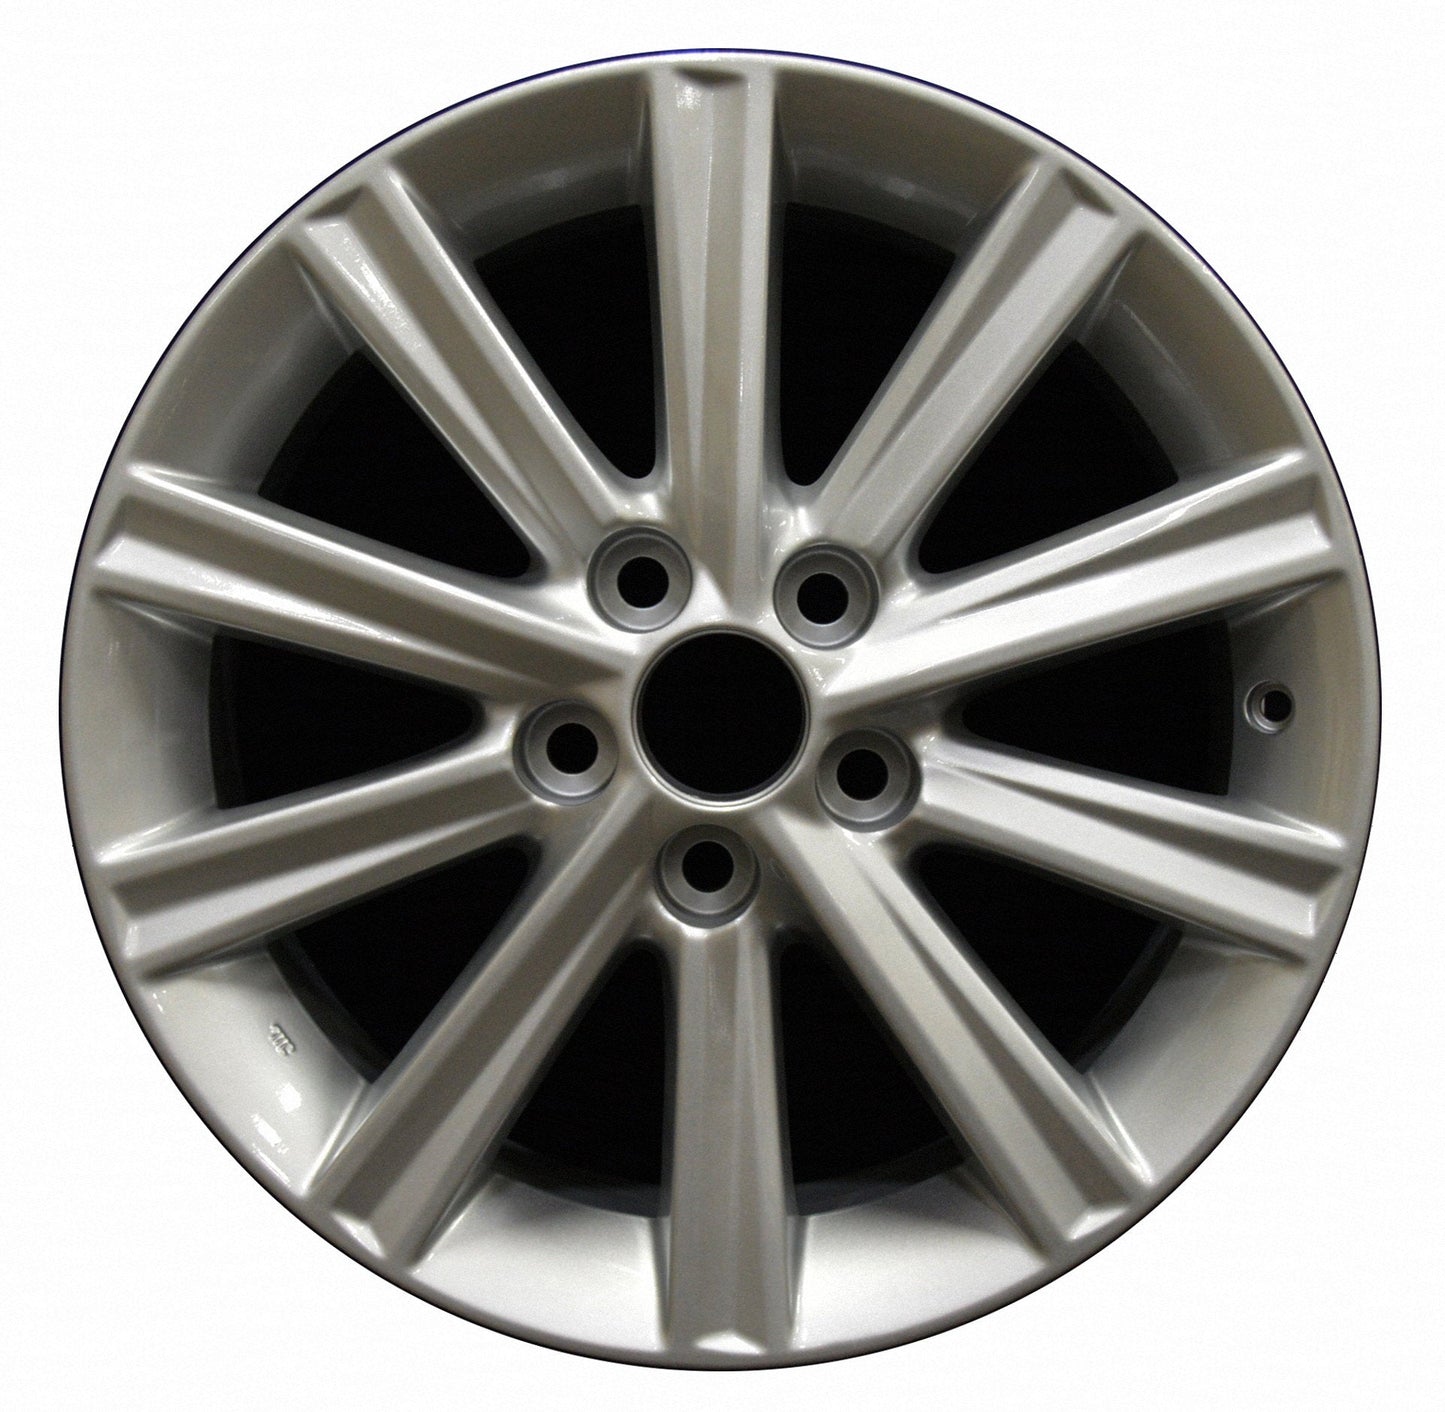 Toyota Camry  2011, 2012, 2013, 2014 Factory OEM Car Wheel Size 17x7 Alloy WAO.69603.LS03.FF